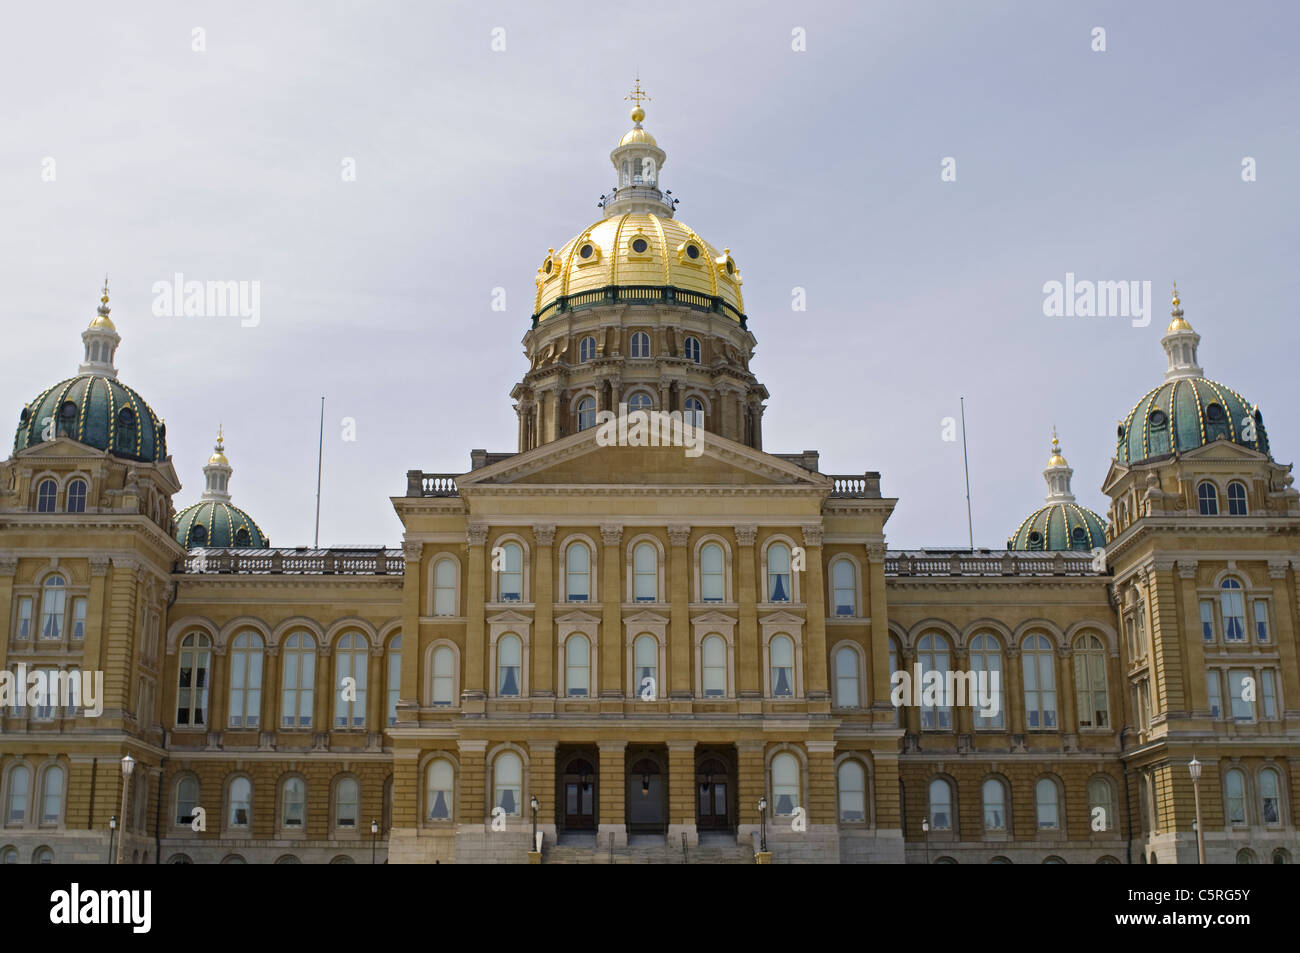 iowa state capitol building showing entrance and front facade including top of domes Stock Photo